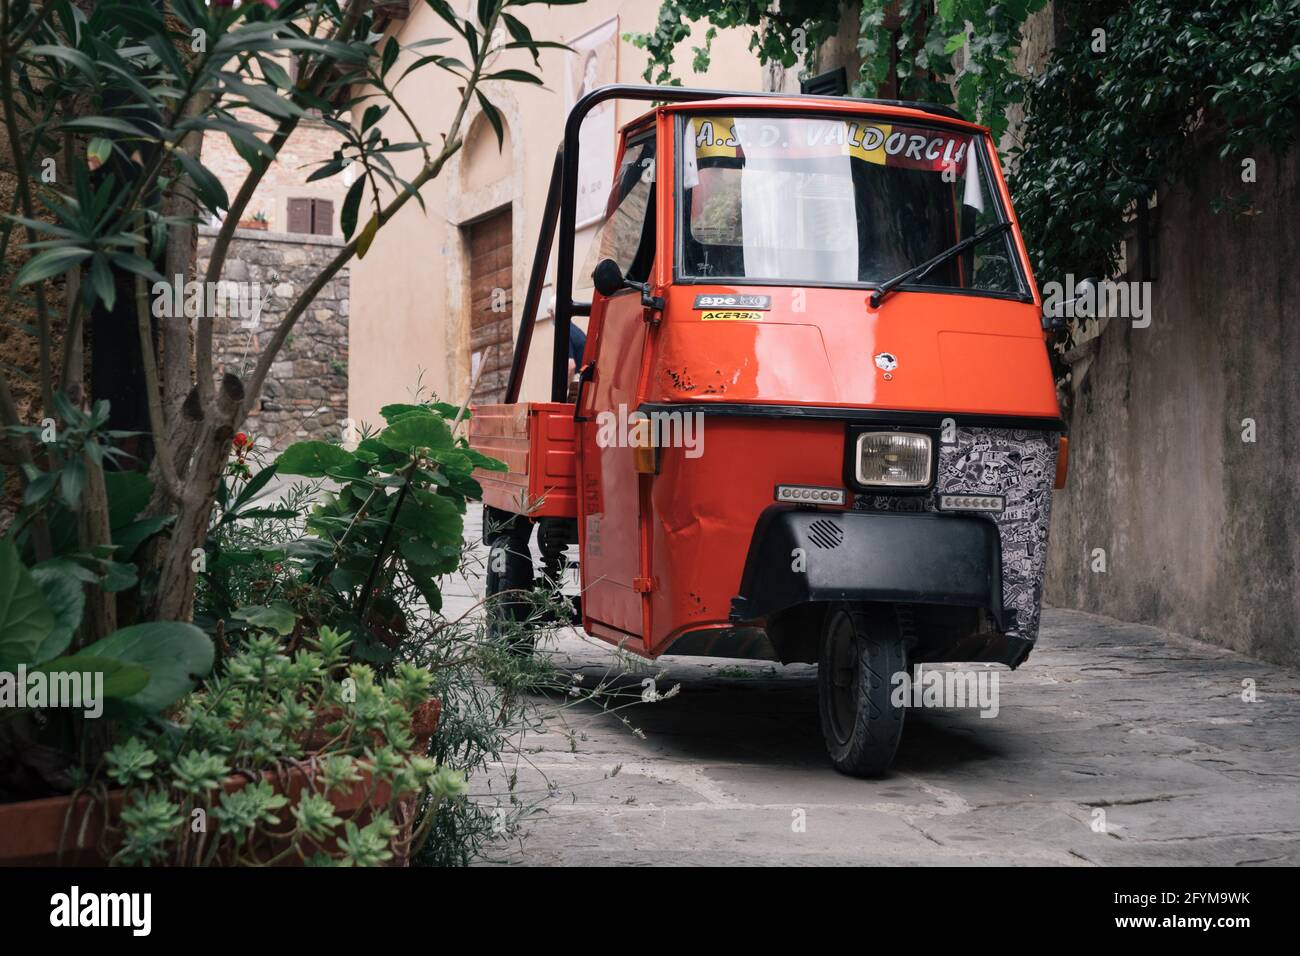 Castiglione d'Orcia, Italy - August 18 2020: Piaggio Ape 50, an Italian three-wheeled light commercial vehicle based on the Vespa Scooter. Stock Photo